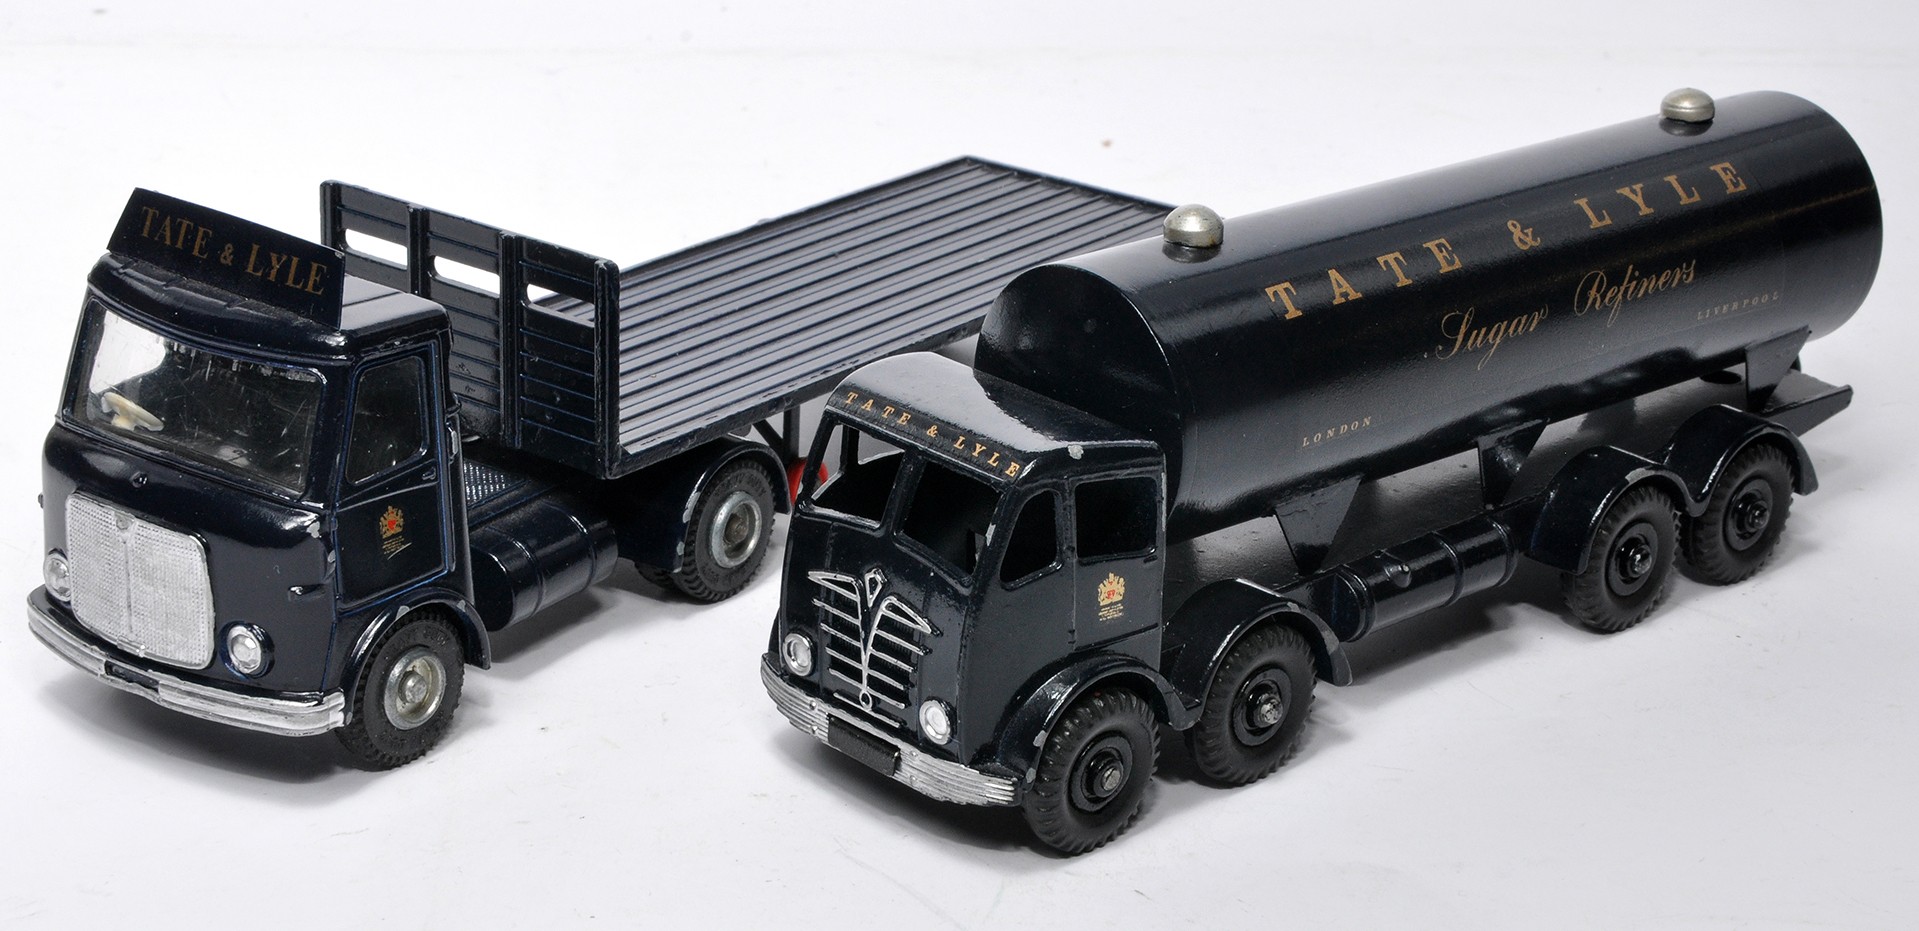 Dinky duo of code 3 issues comprising Foden and AEC truck issues in the livery of Tate and Lyle.